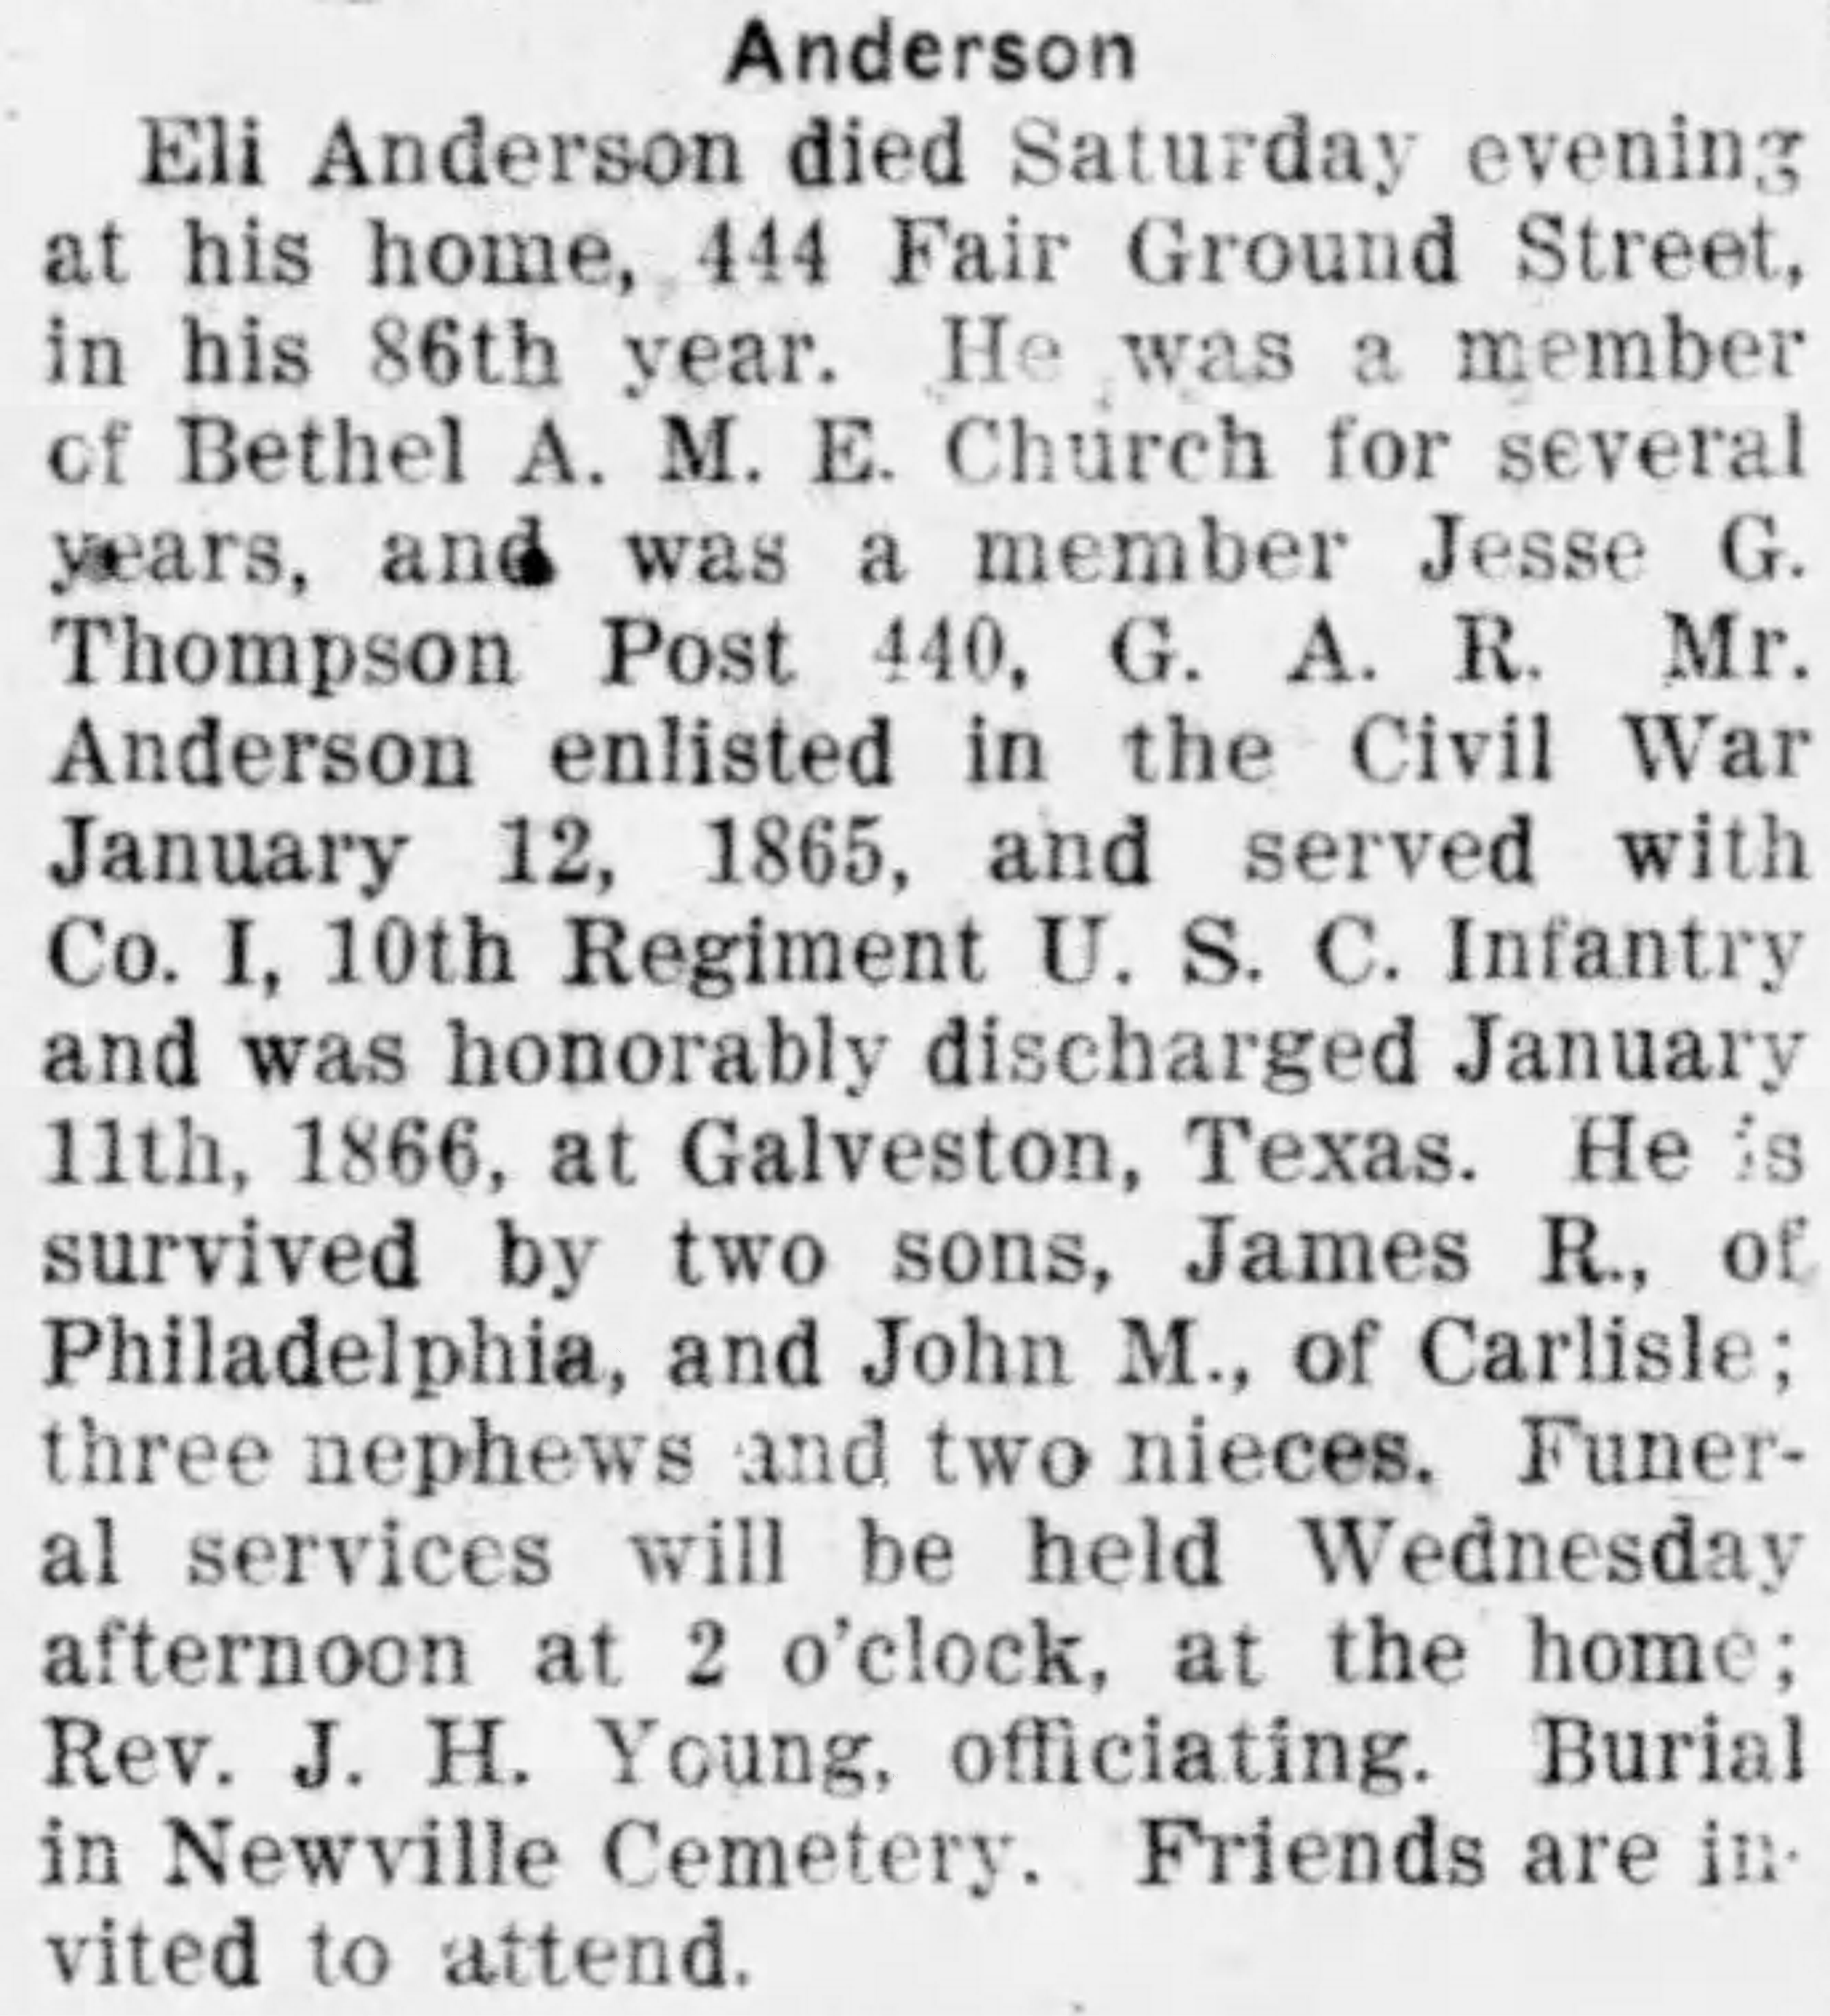 A newspaper obituary announcing the death of Eli Anderson